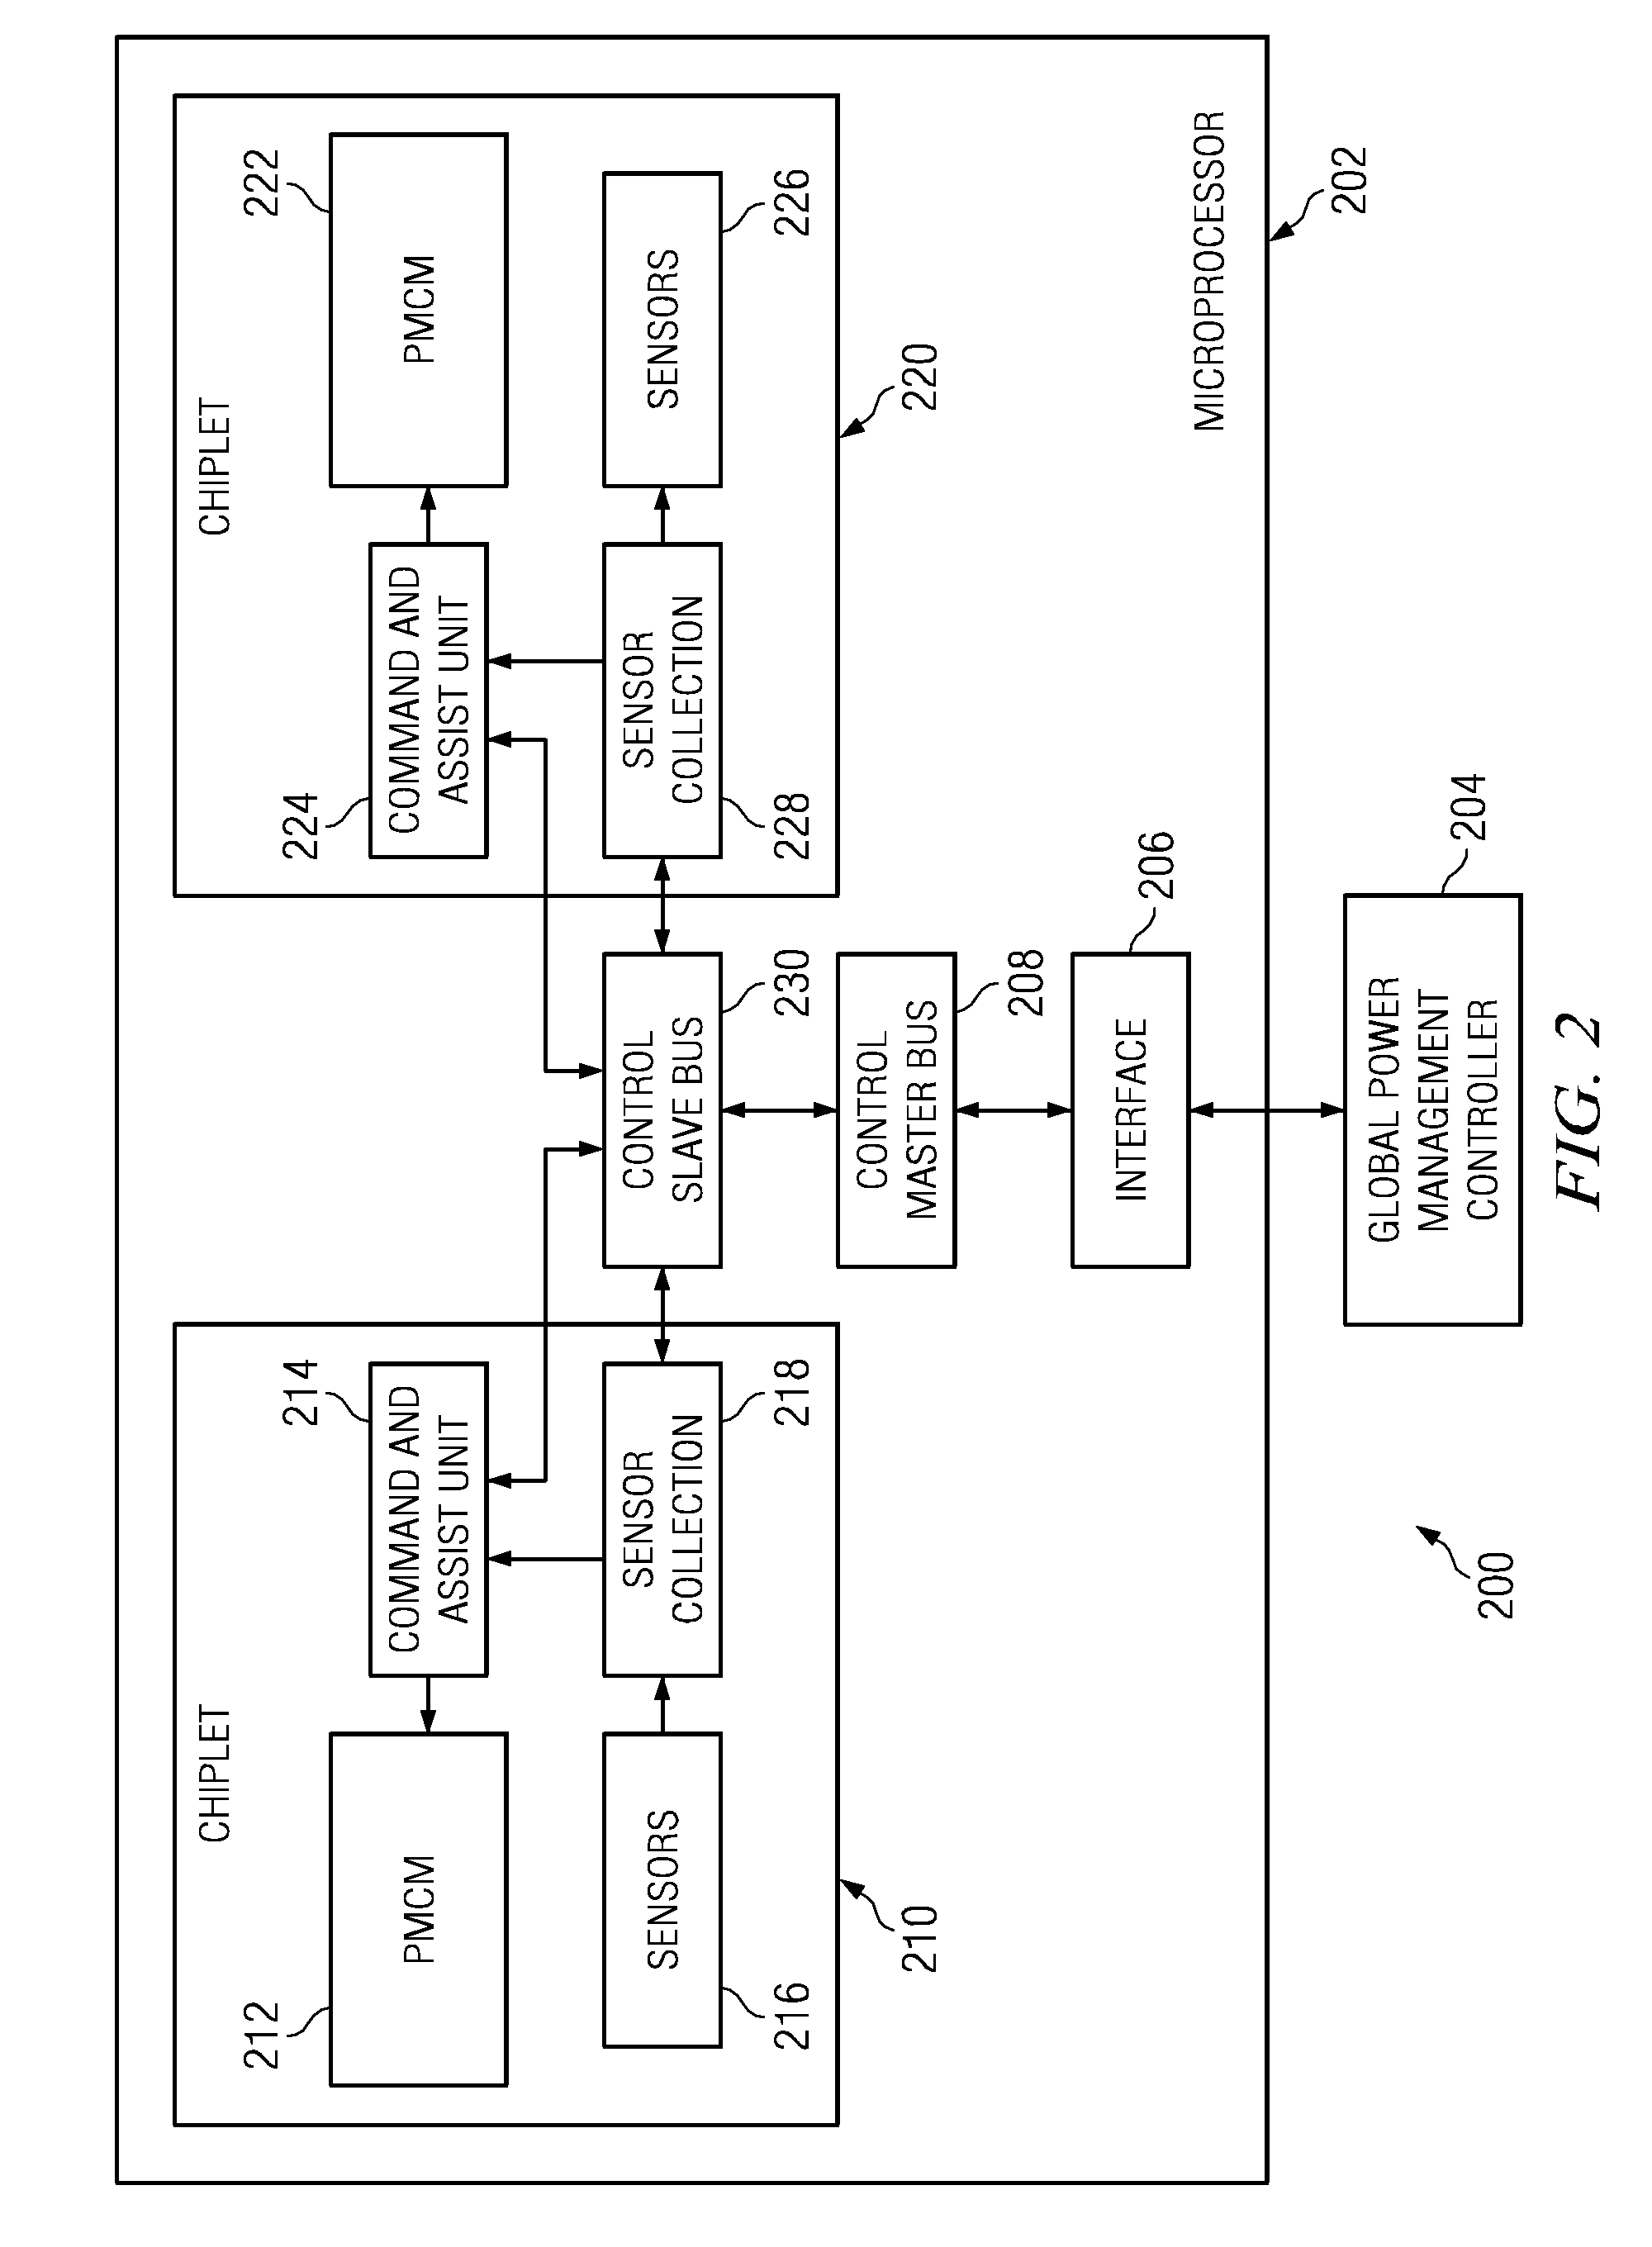 Method and system of multi-core microprocessor power management and control via per-chiplet, programmable power modes